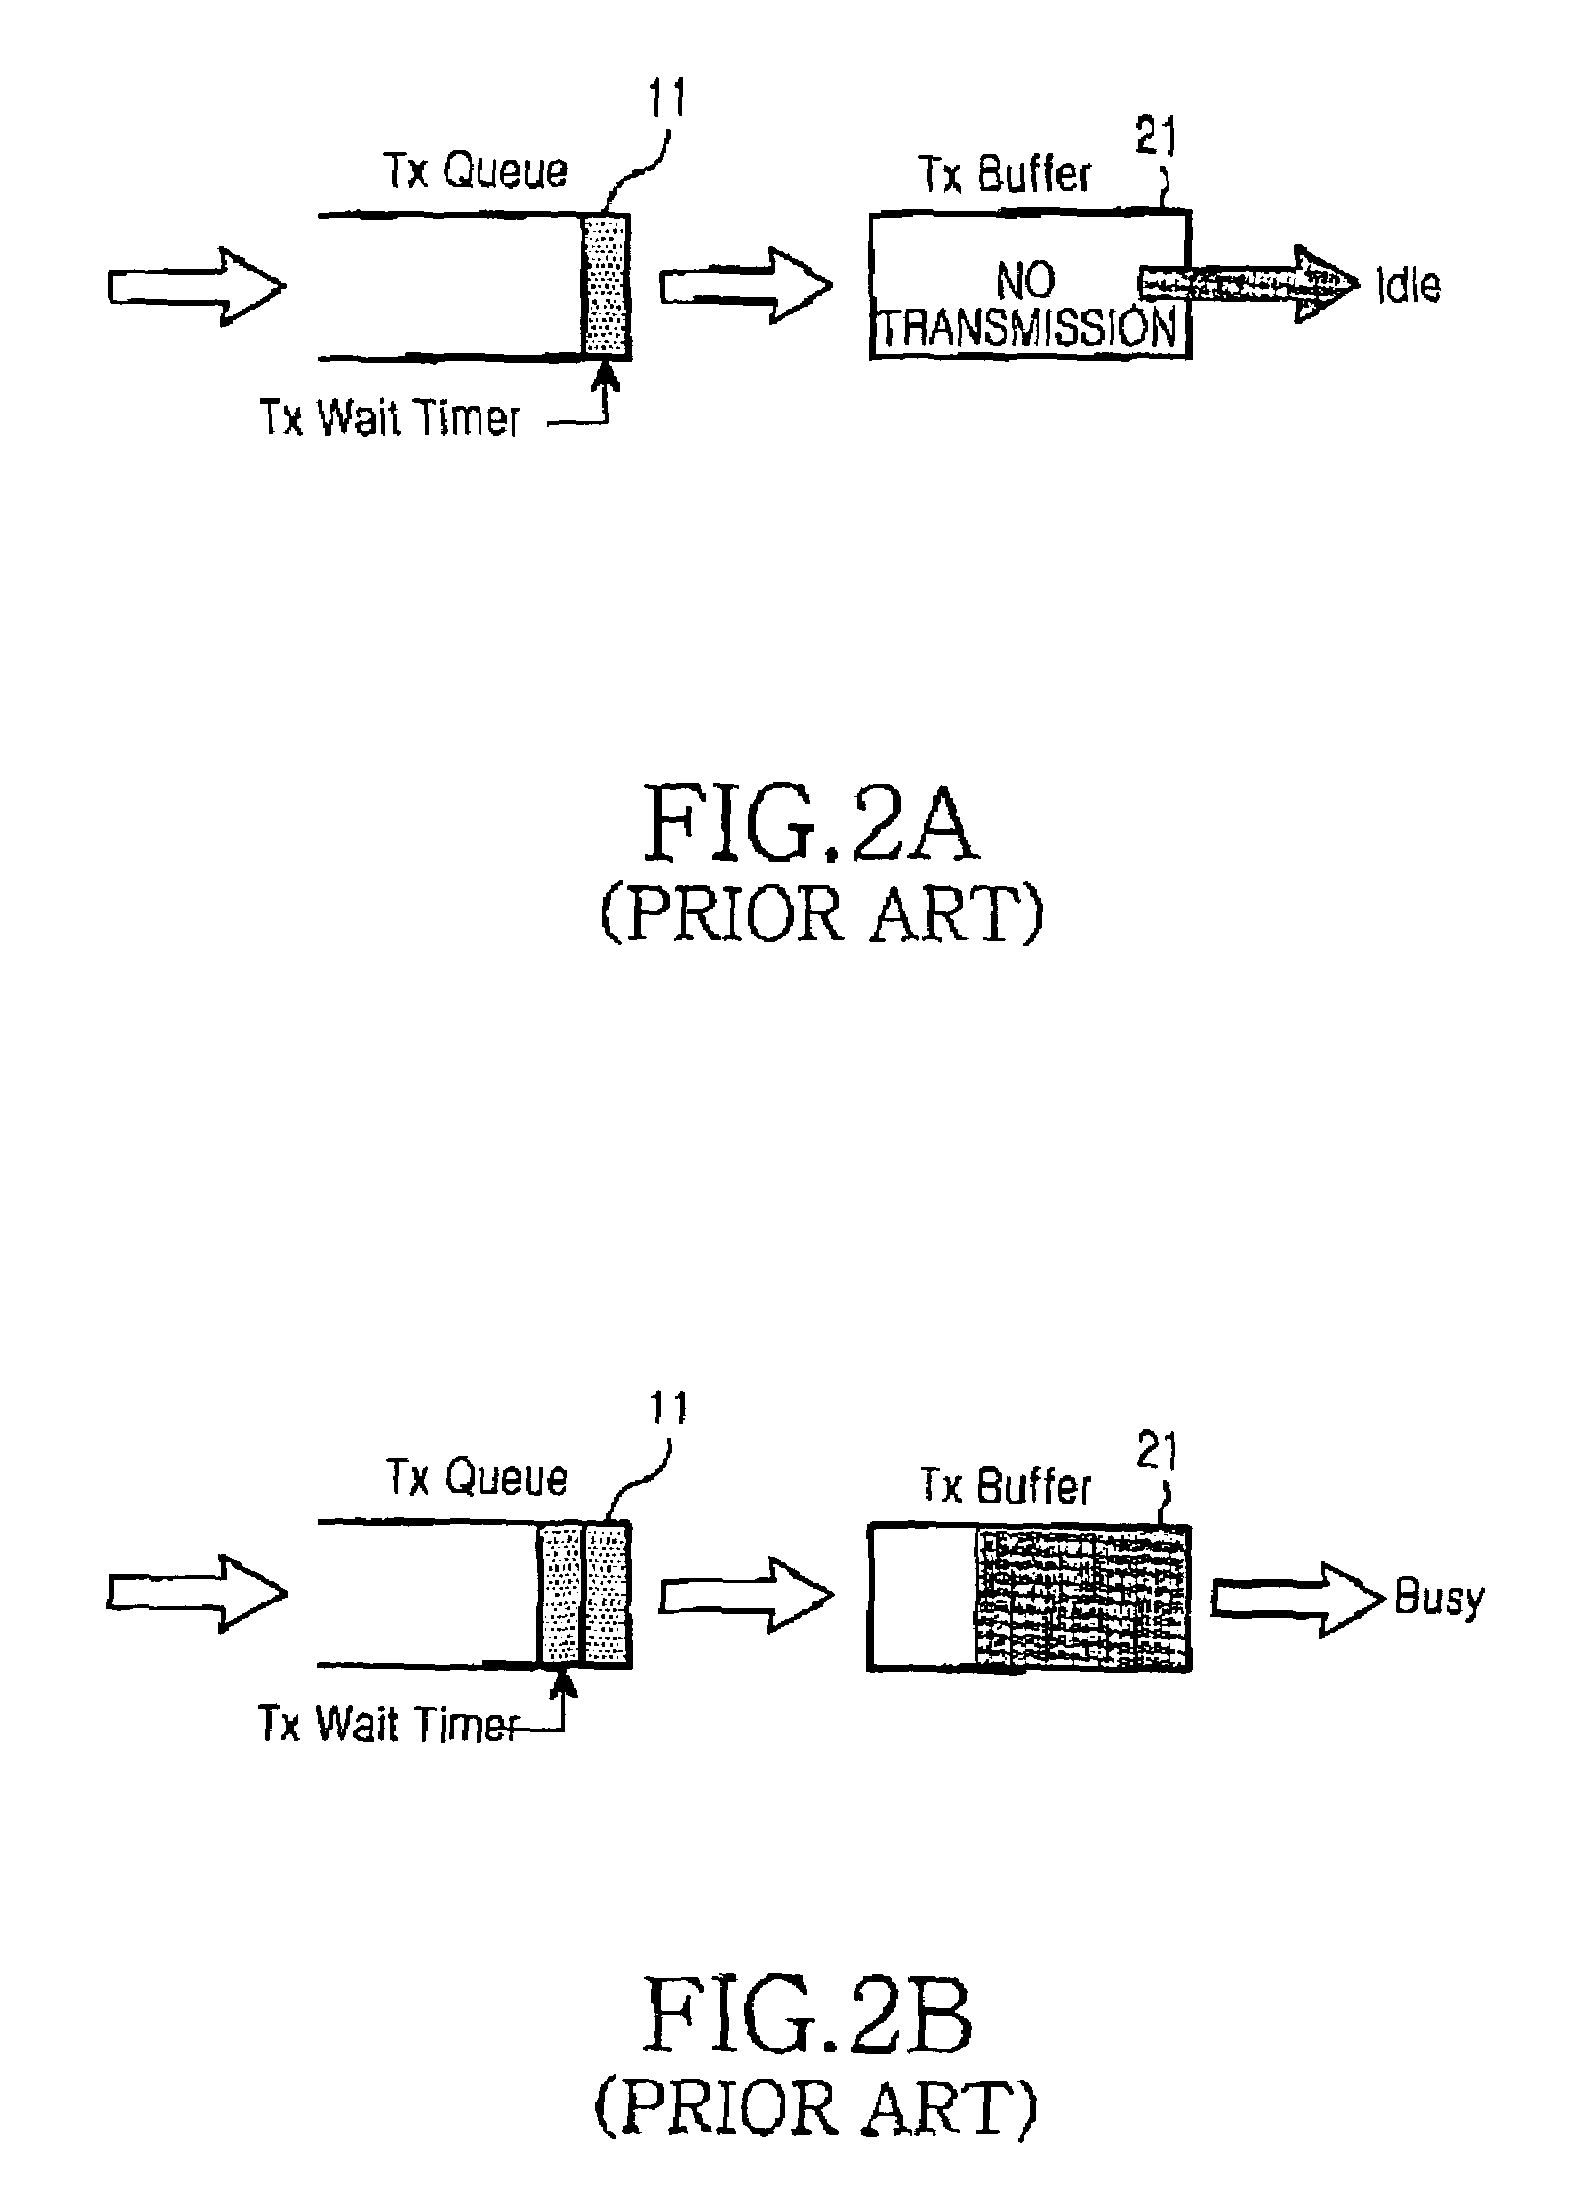 Apparatus and method for minimizing transmission delay in a data communication system